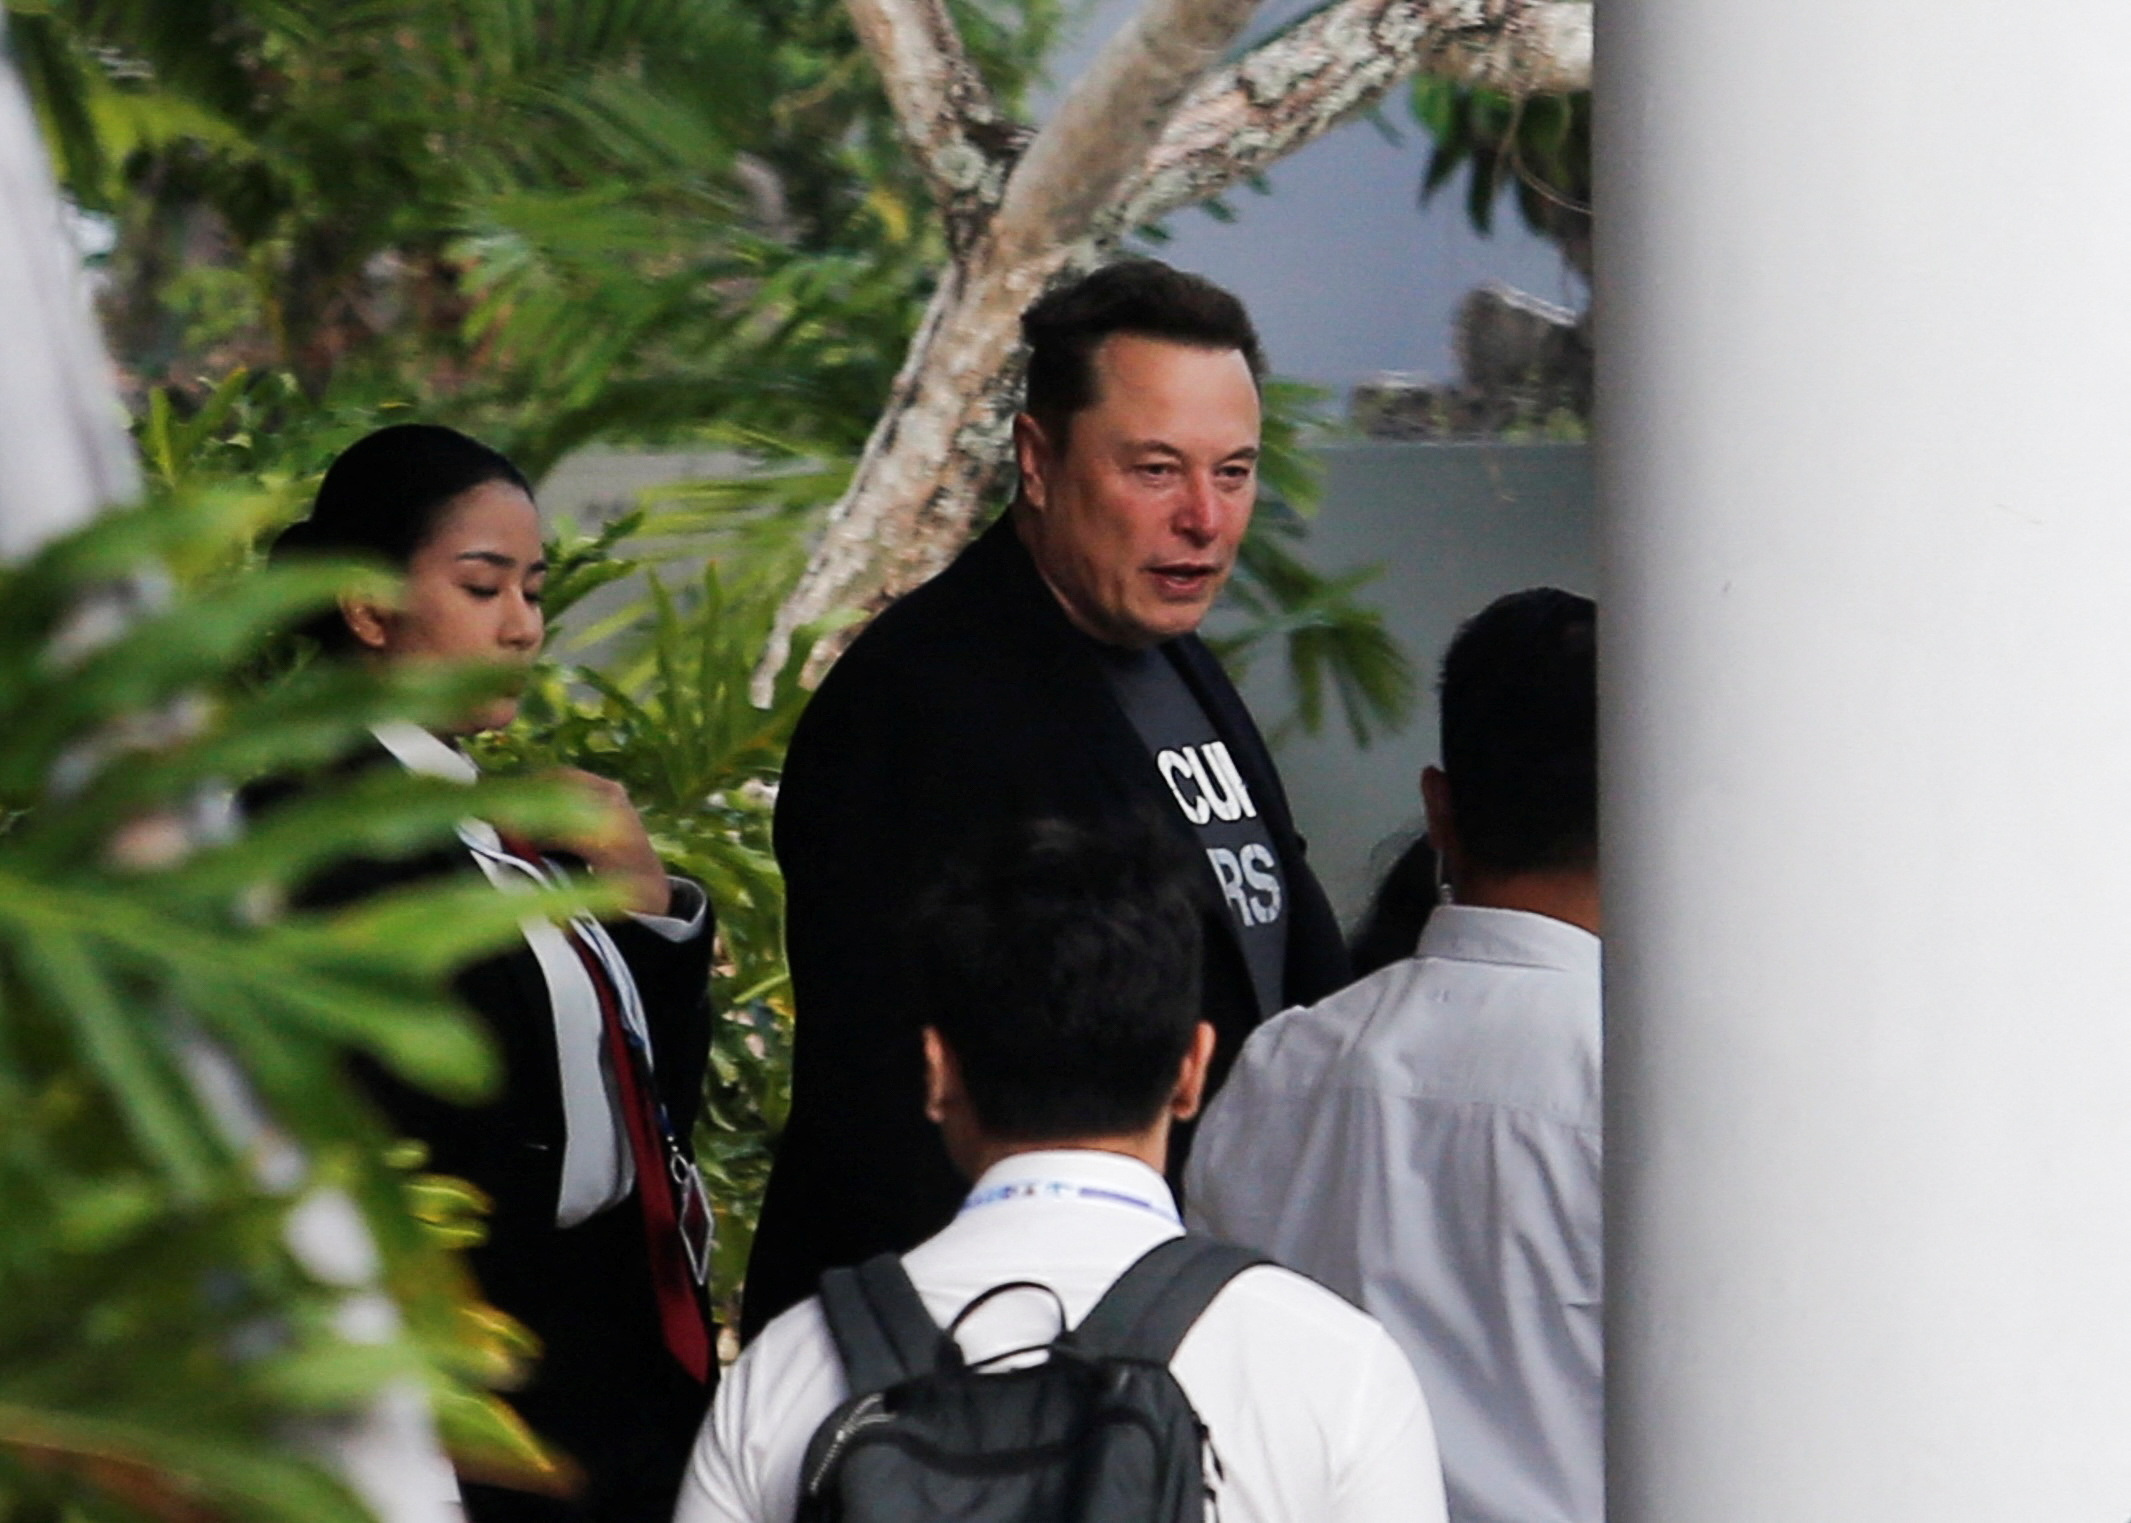 Elon Musk, Chief Executive Officer of SpaceX and Tesla and owner of X, arrives at the I Gusti Ngurah Rai Bali International Airport, in Bali